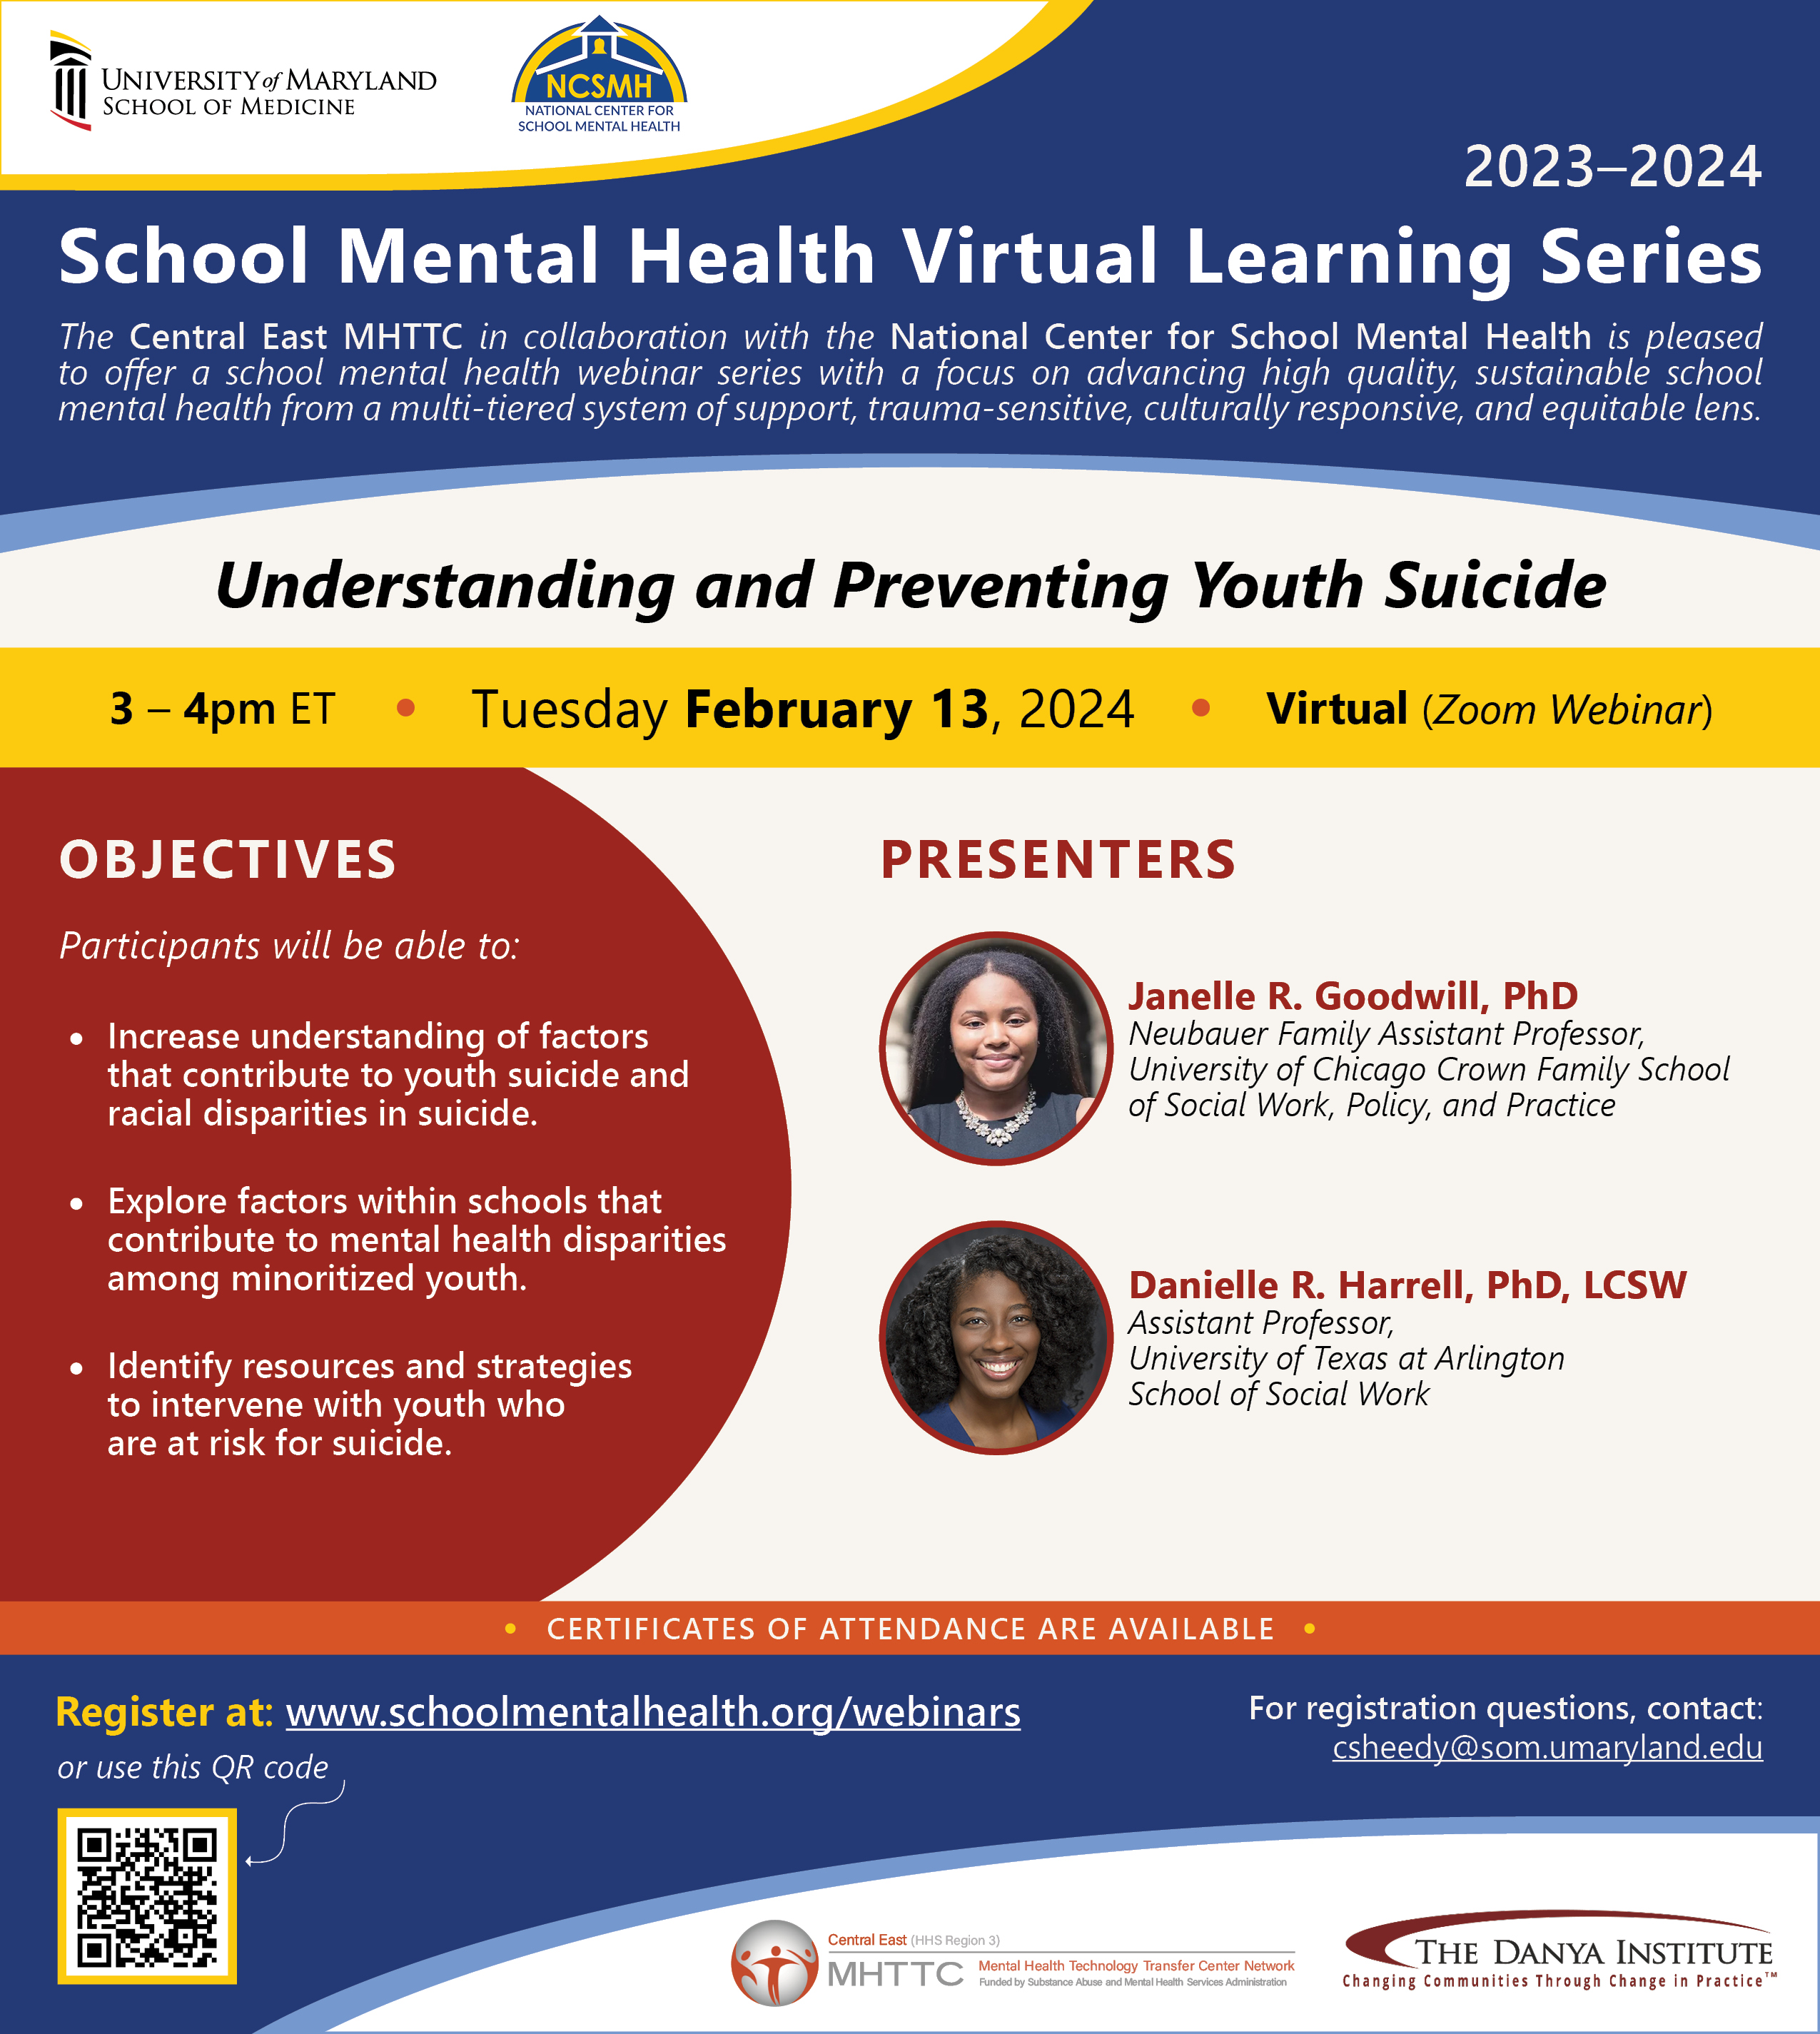 School Mental Health Virtual Learning Series: Understanding and Preventing Youth Suicide. 3-4pm ET, Tuesday February 13, 2024. Virtual (Zoom, webinar). Presenters: Janelle R. Goodwill, PhD, Danielle R. Harrell, PhD, LCSW.